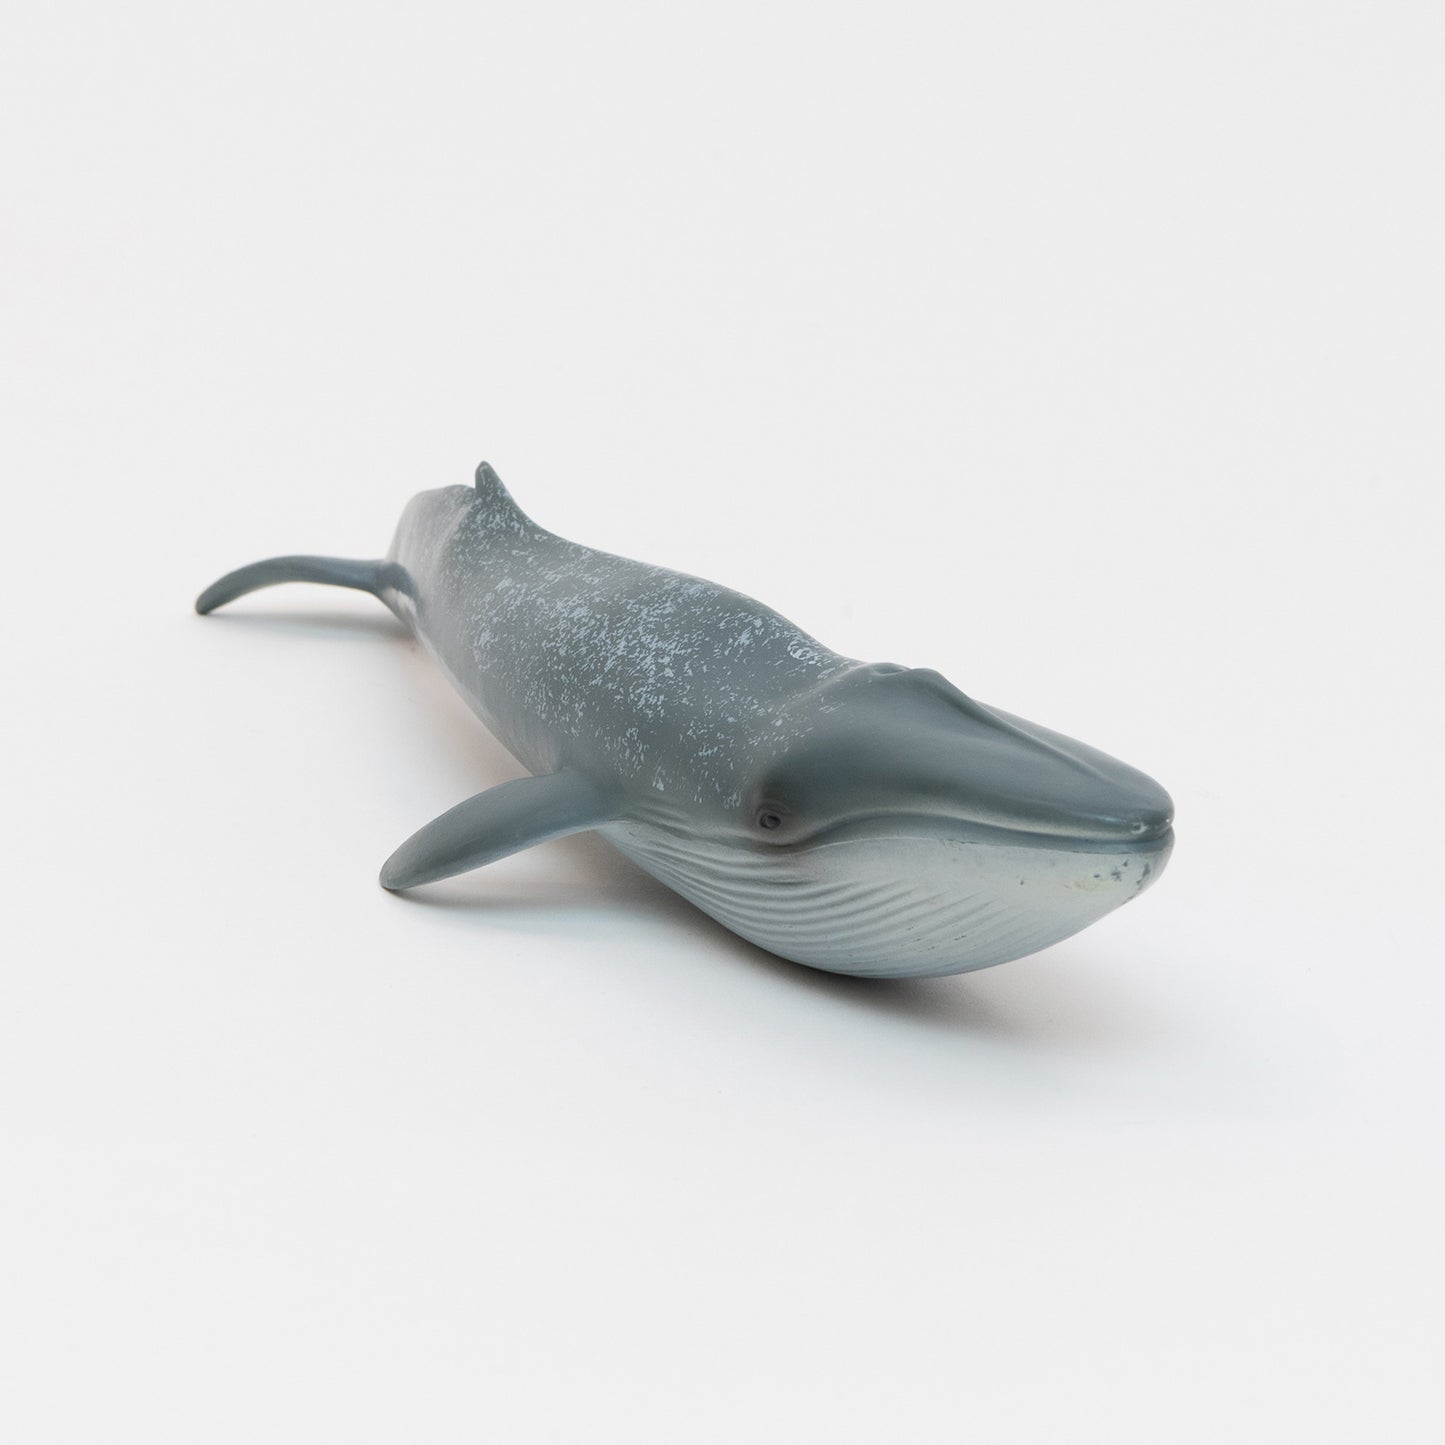 A blue whale plastic toy on a white background.